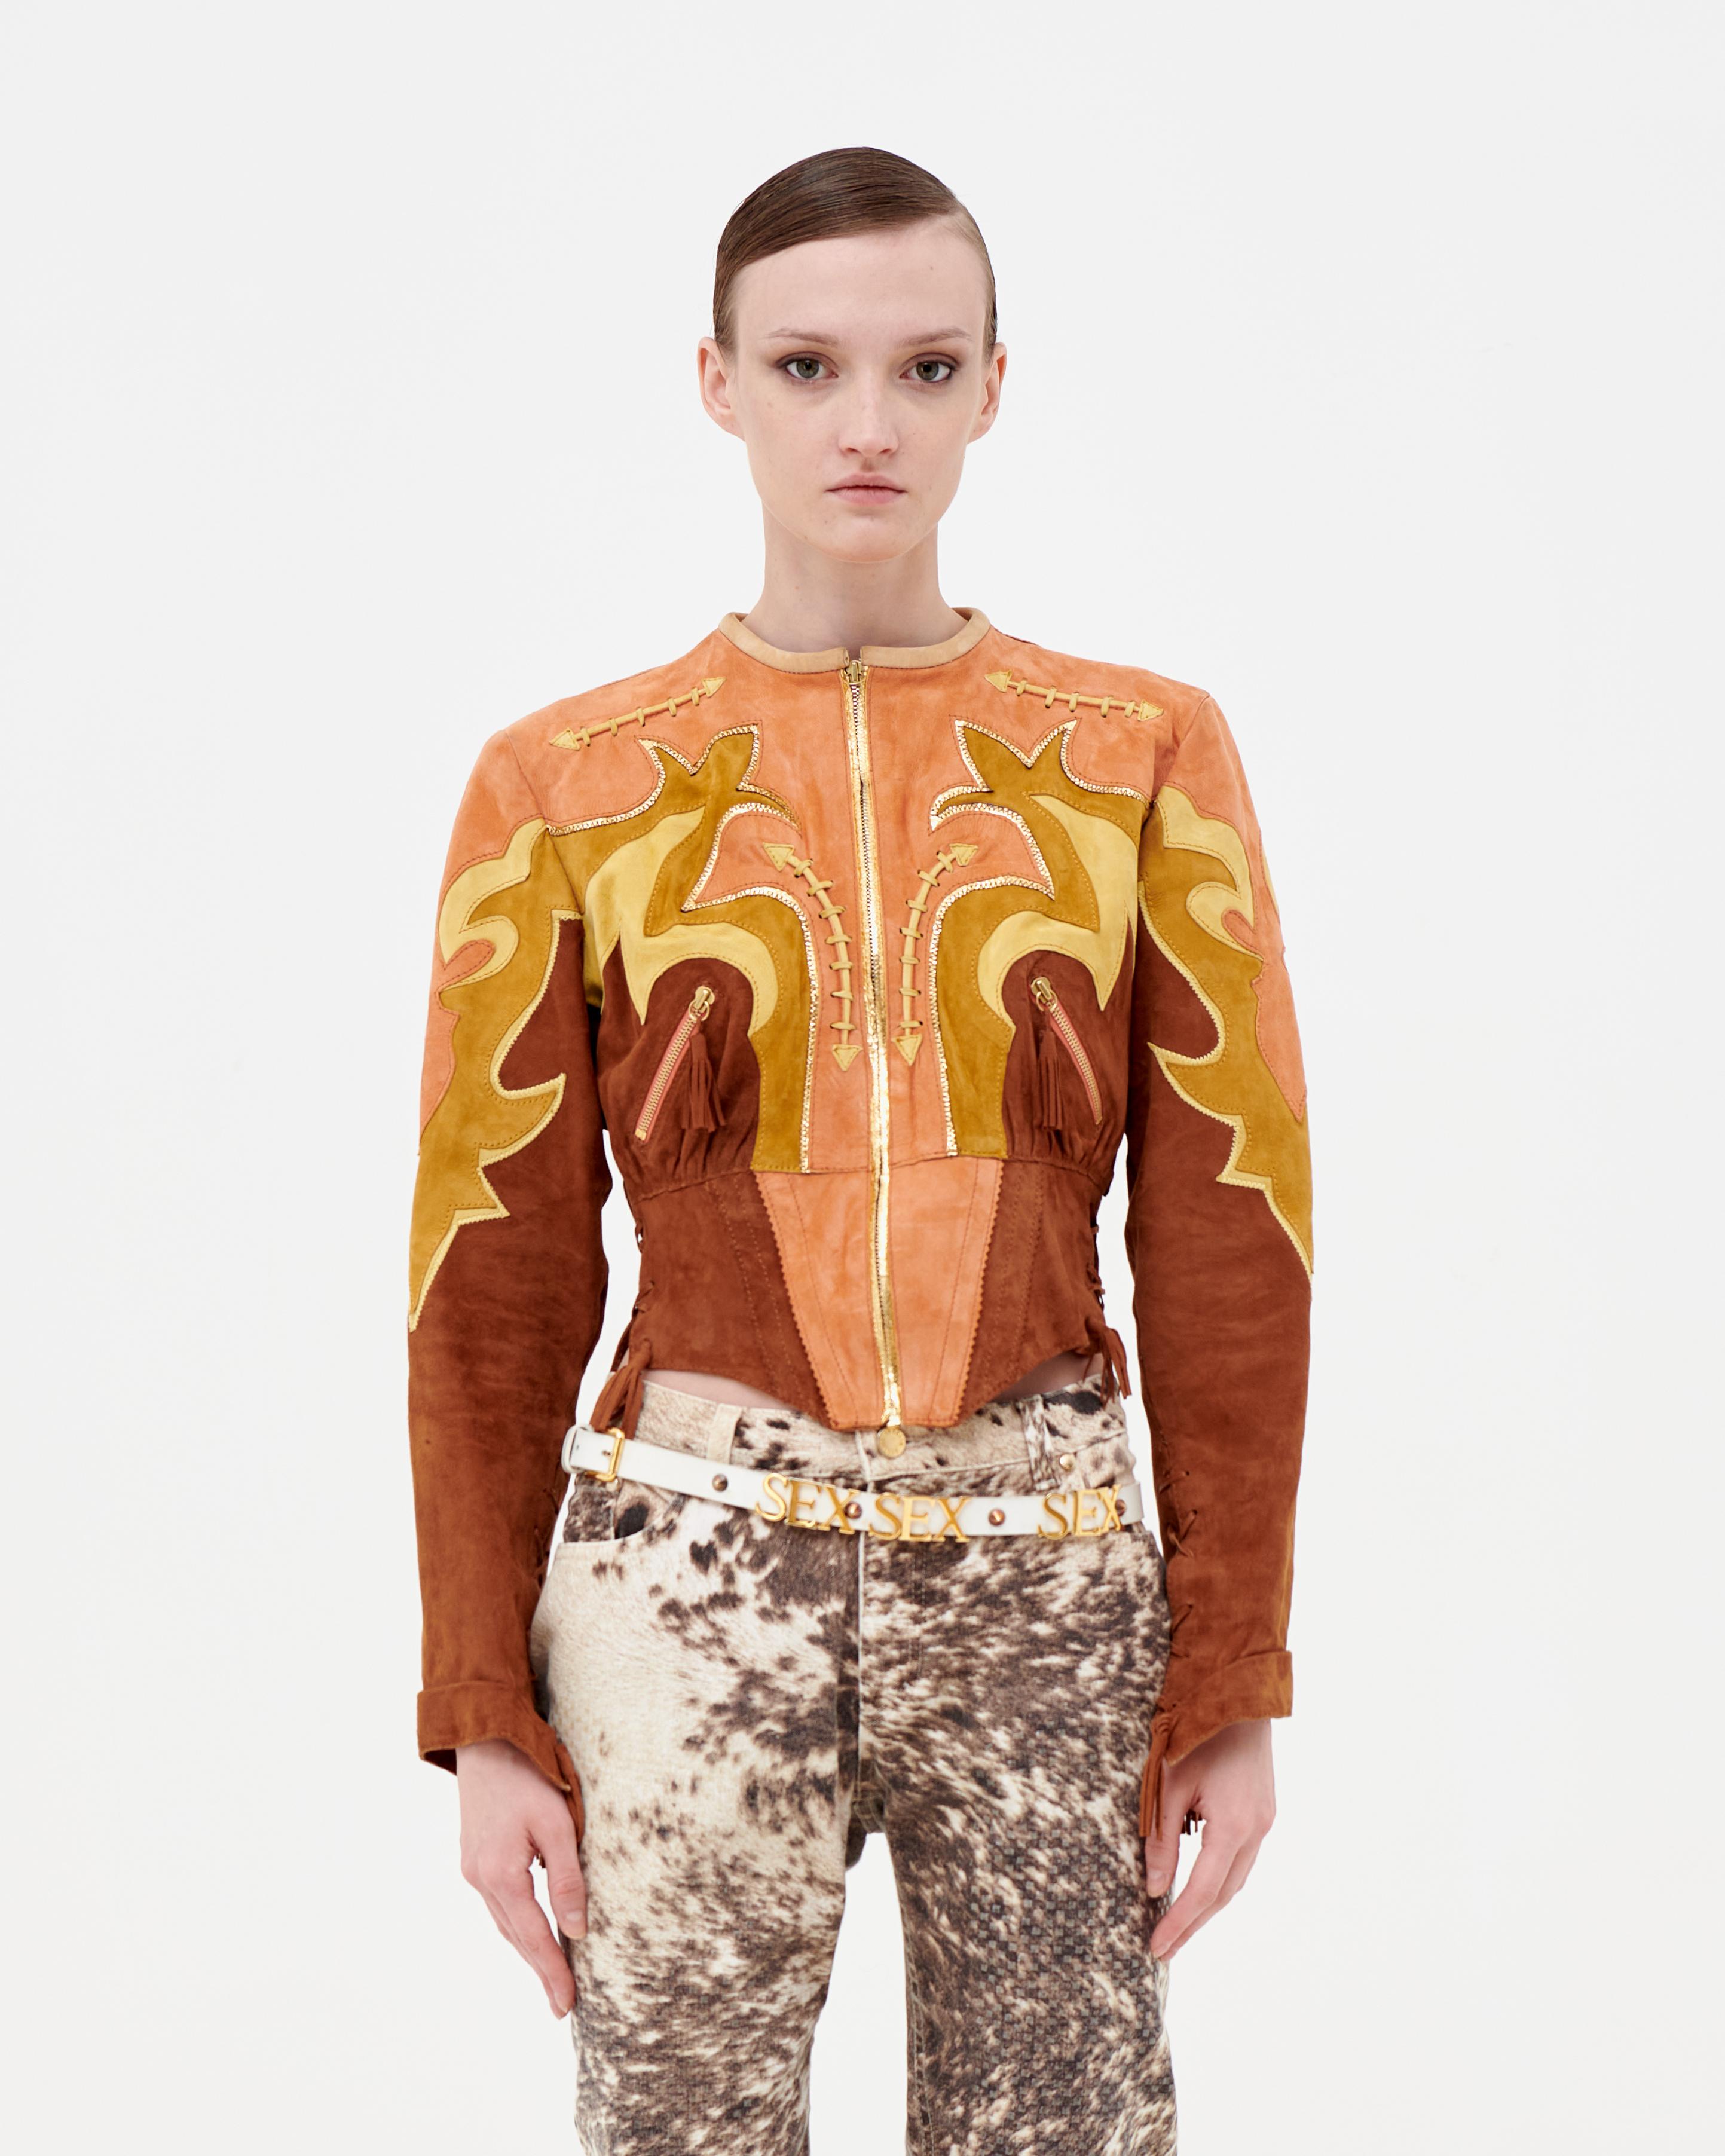 Roberto Cavalli 70s-inspired Western crop leather jacket in soft hand-cut Deer skin and suede. Corset style, metallic gold leather accents, lace-up details on both sleeves and sides.

Runway piece from Spring/Summer 2004, worn by Marianna Weickett